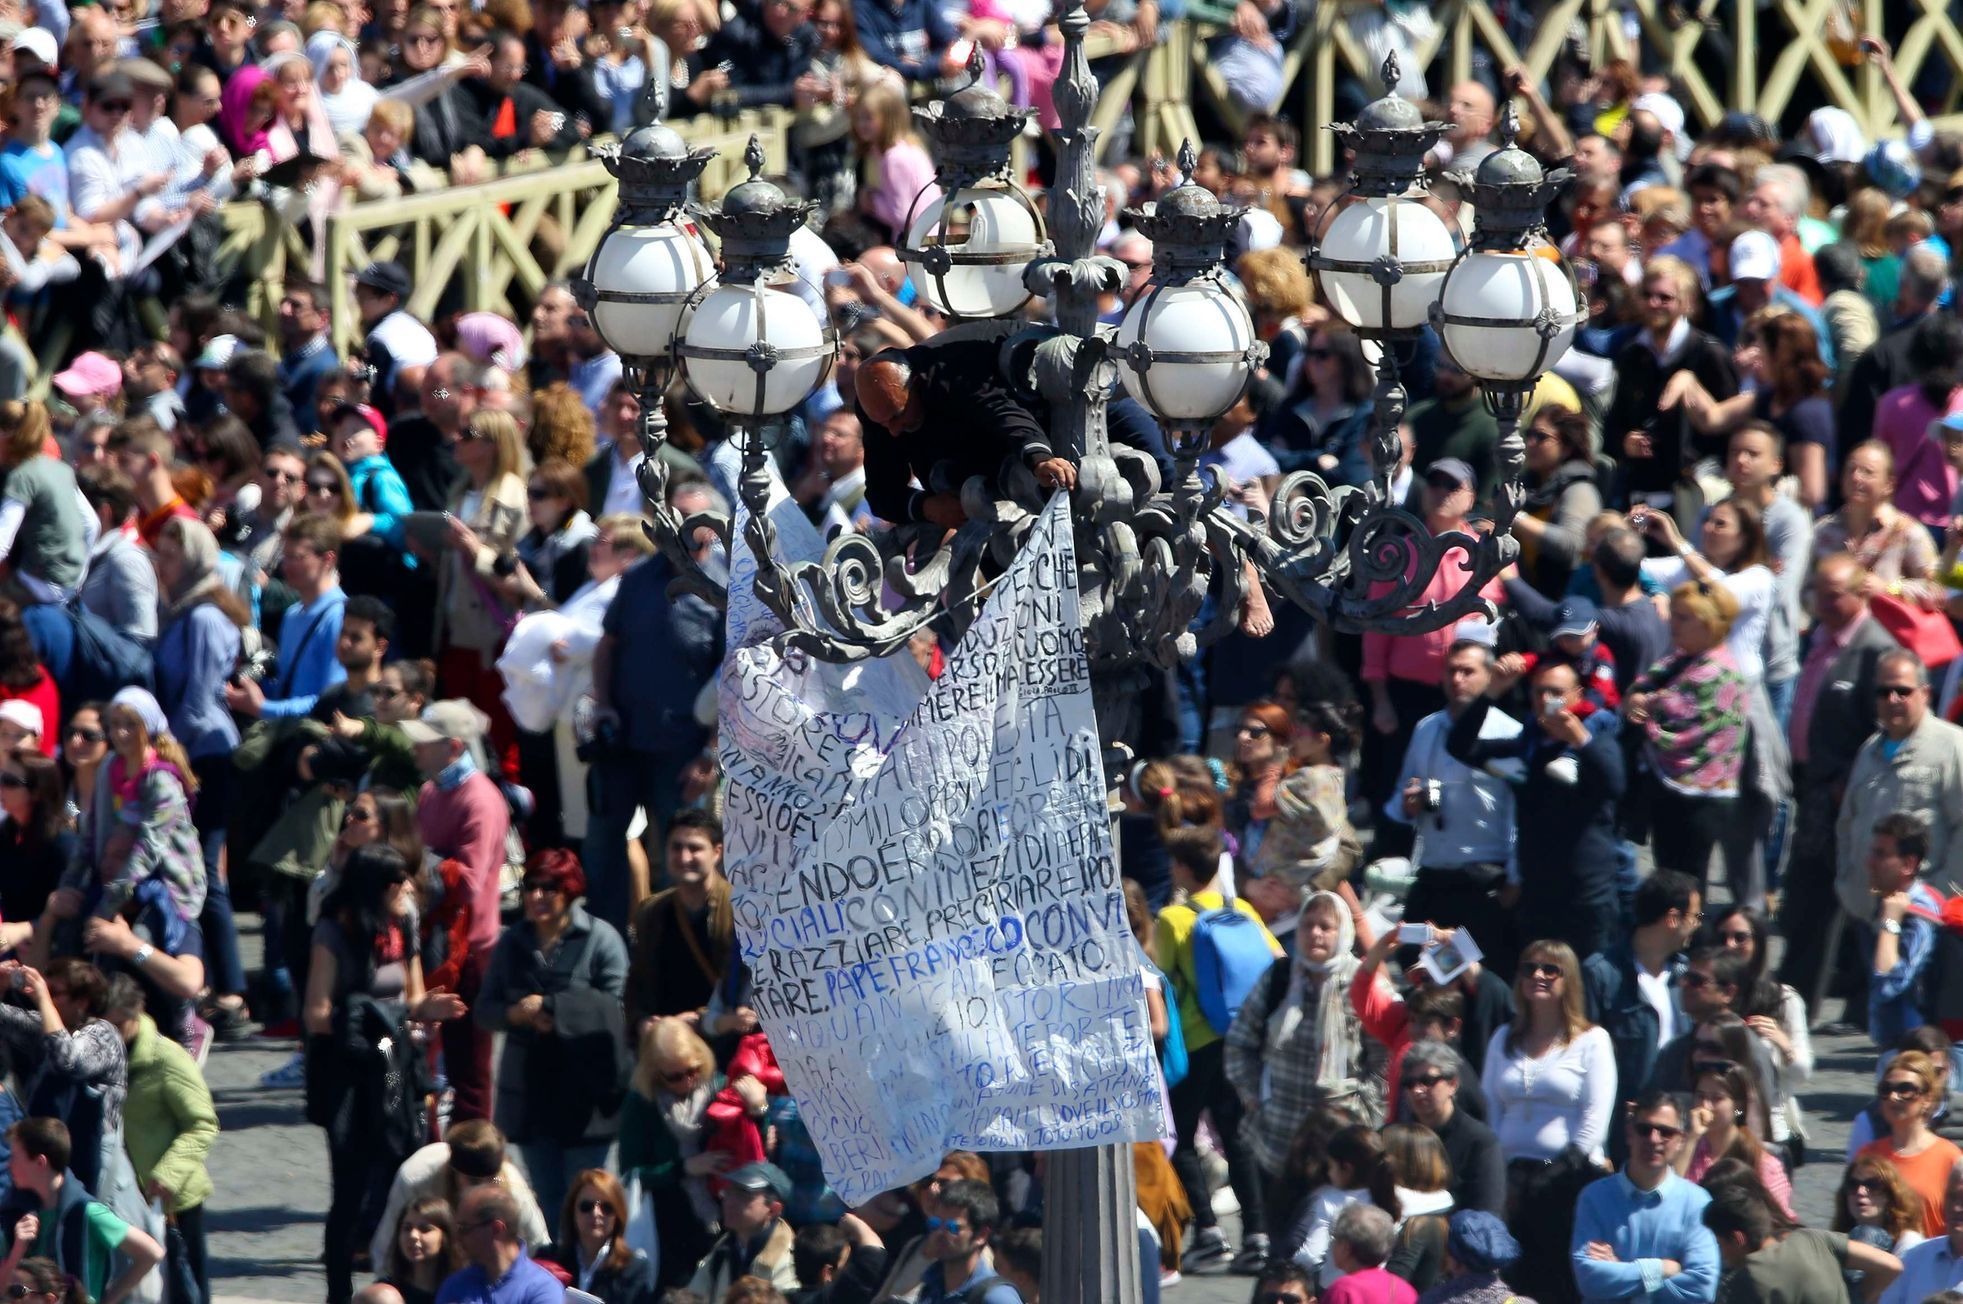 A protester hangs a banner over a street light as Pope Francis leads the Easter Mass in Saint Peter's Square at the Vatican